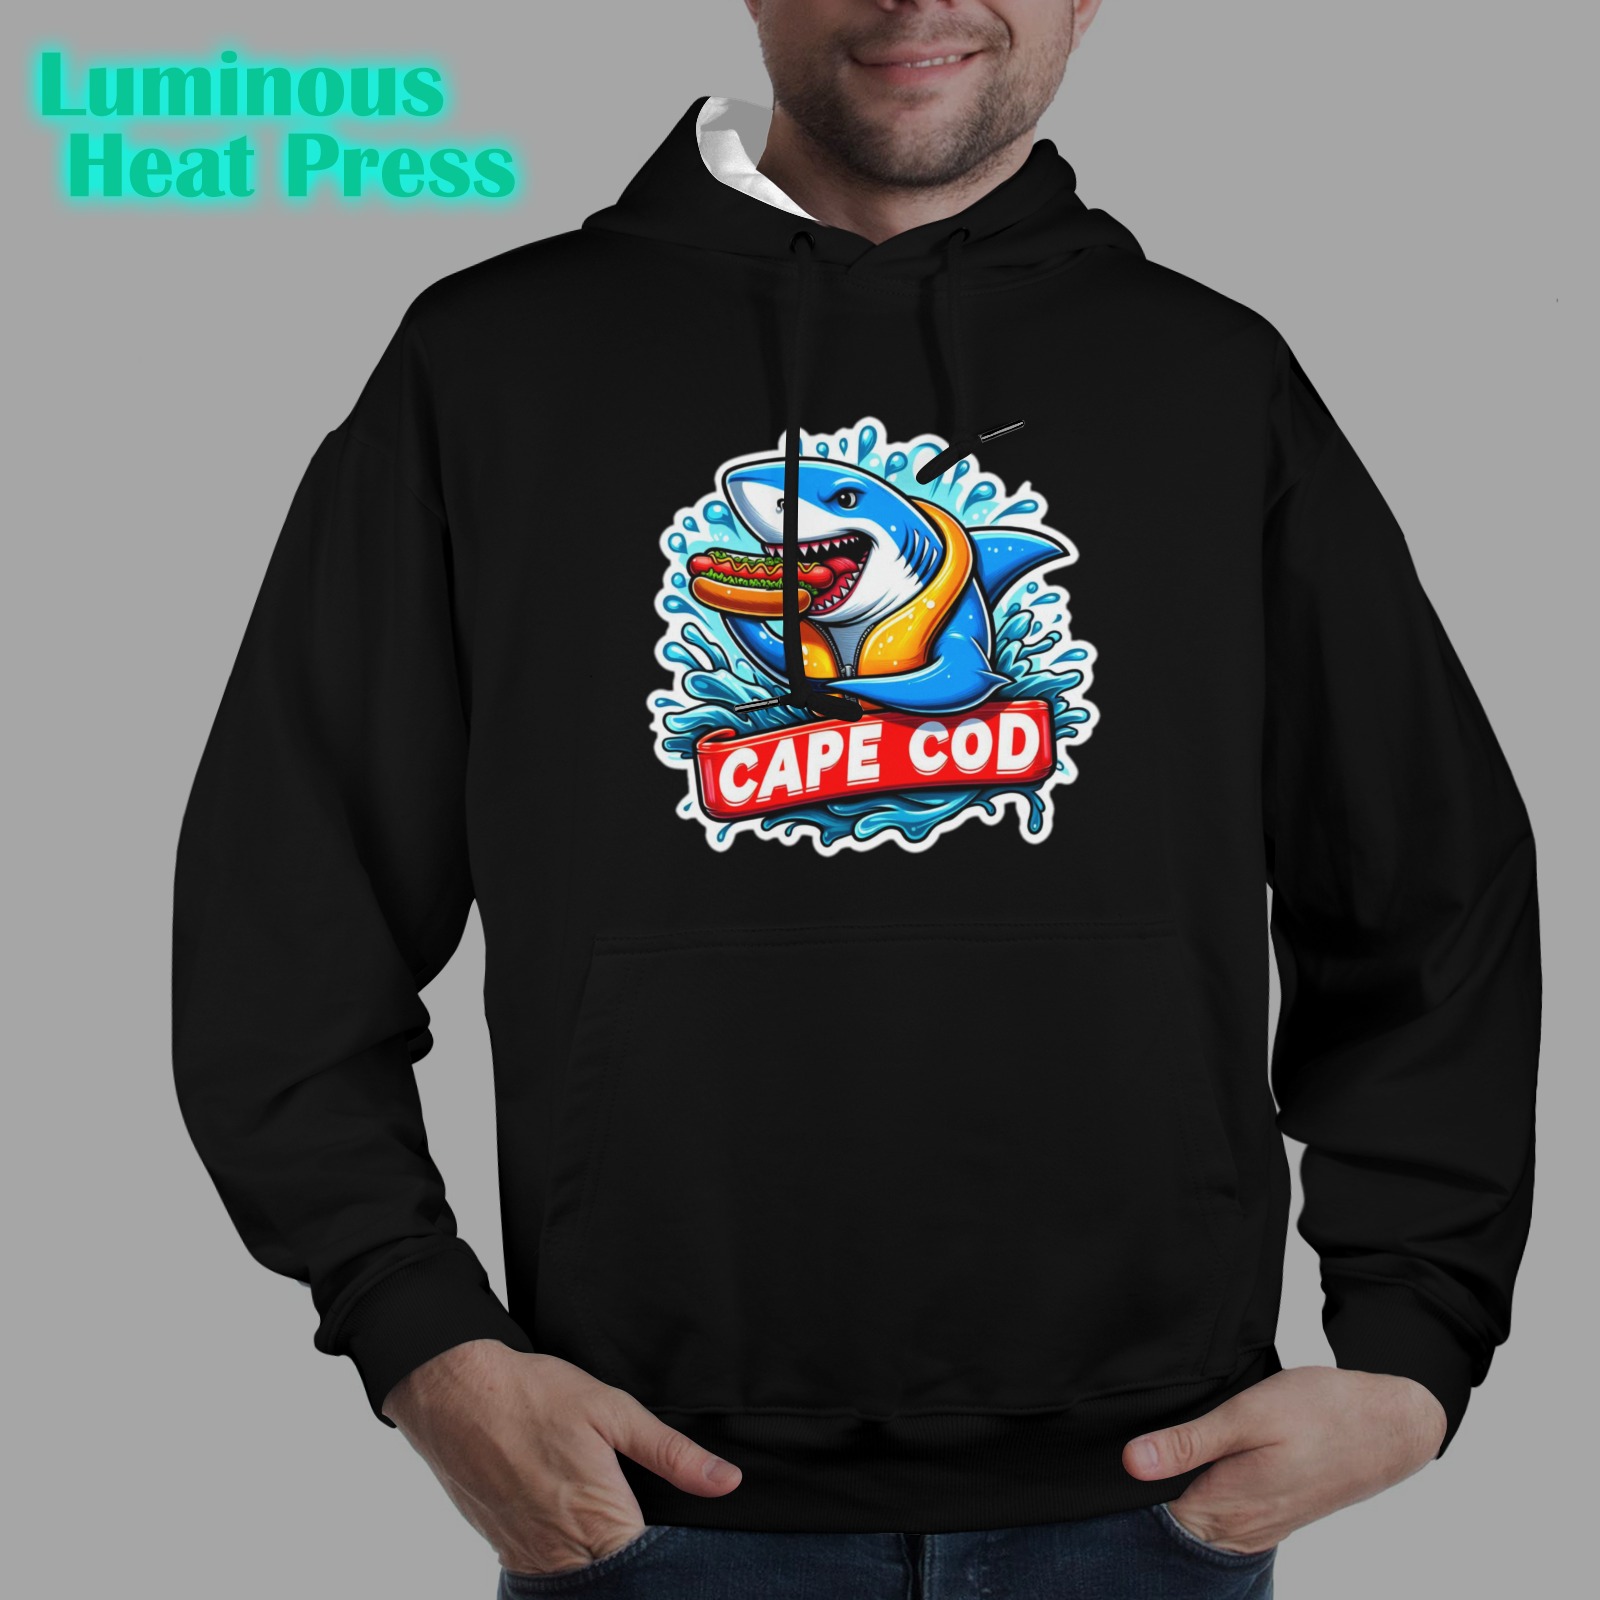 CAPE COD-GREAT WHITE EATING HOT DOG 3 Men's Glow in the Dark Hoodie (Front Printing)